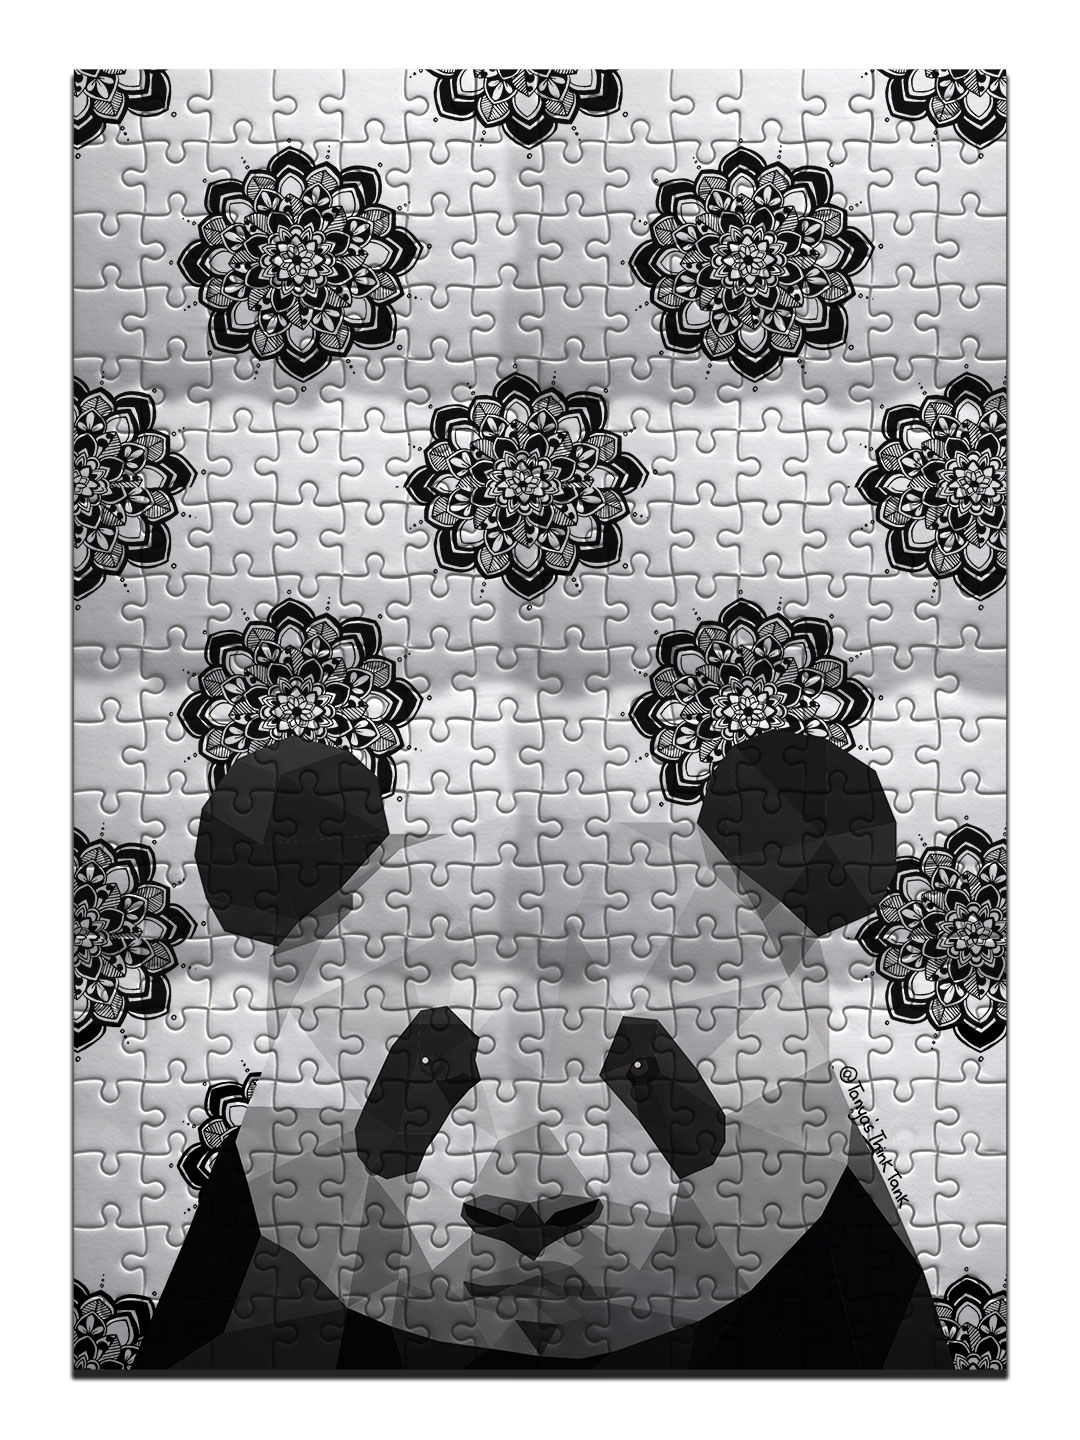 Buy Panda Poly - Cardboard Puzzles Puzzles Online